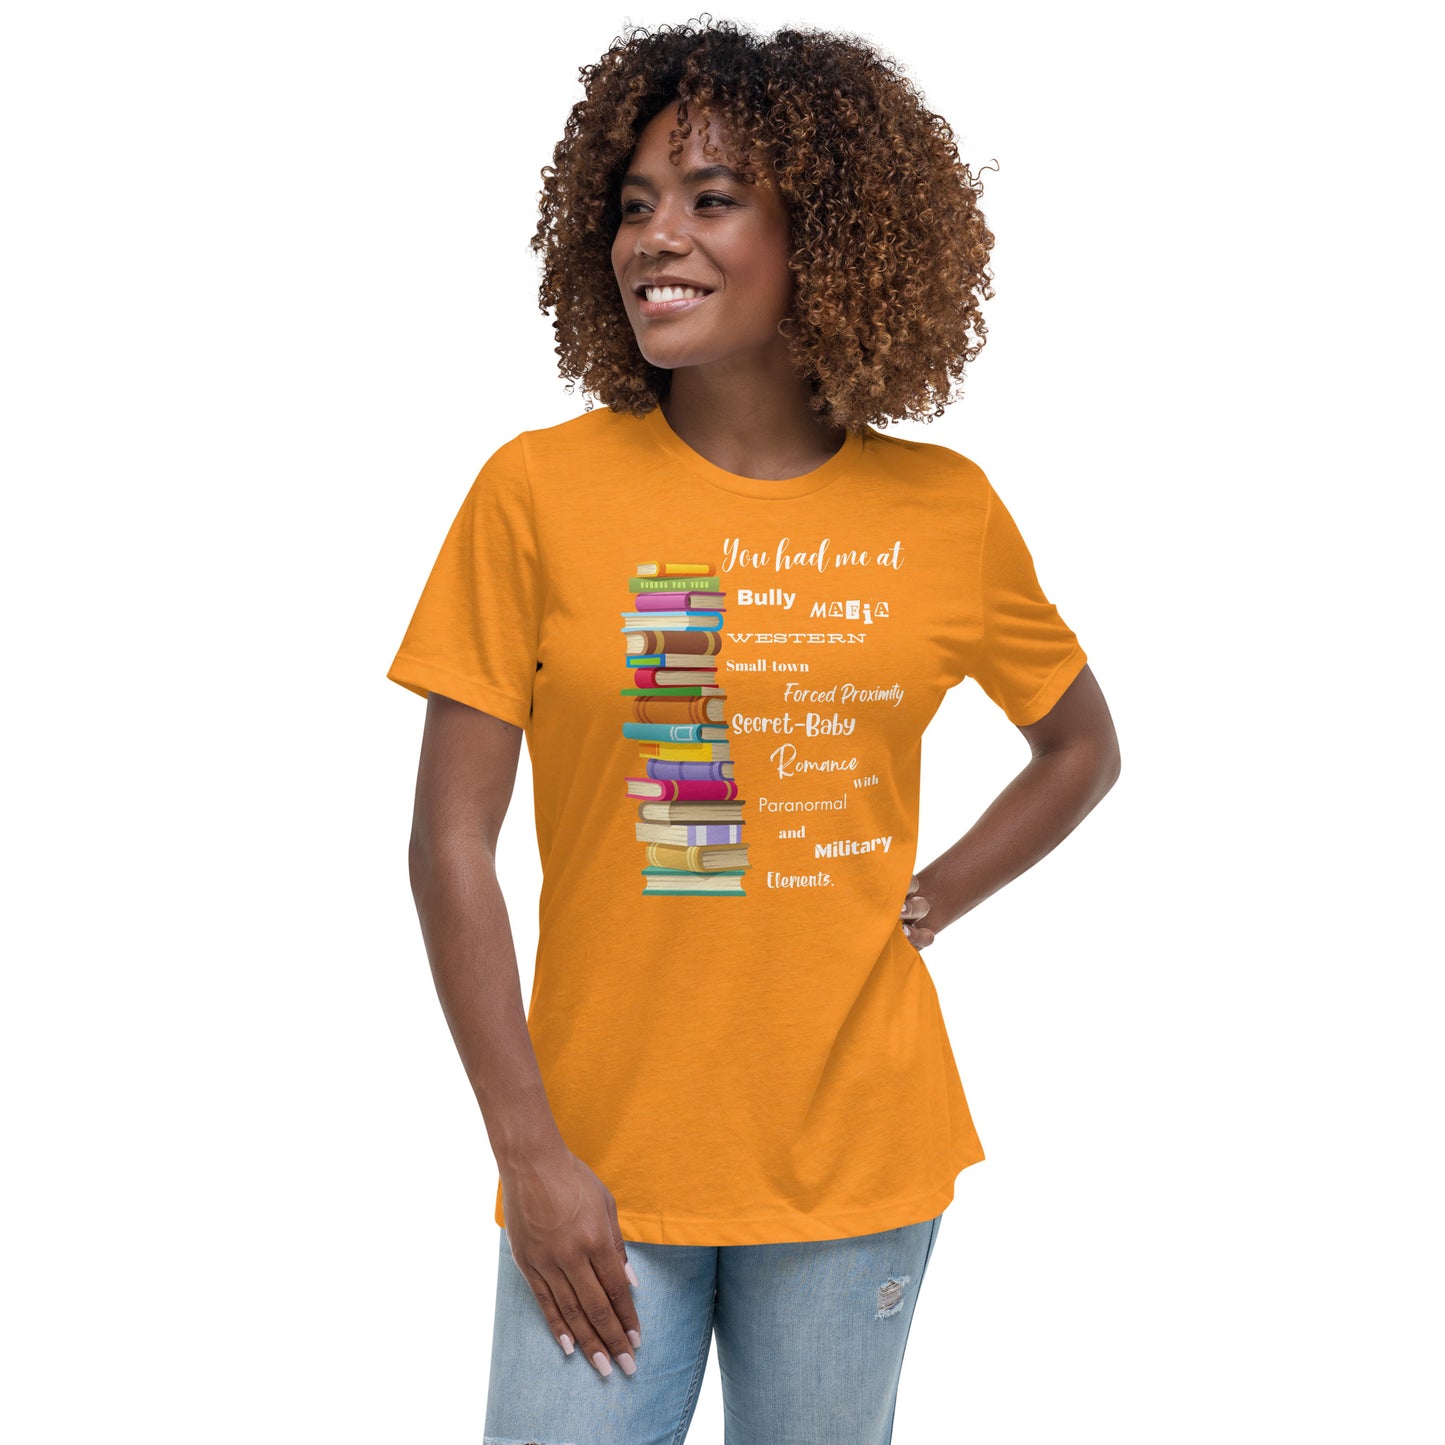 Women's Relaxed T-Shirt You had me at... multi-genre